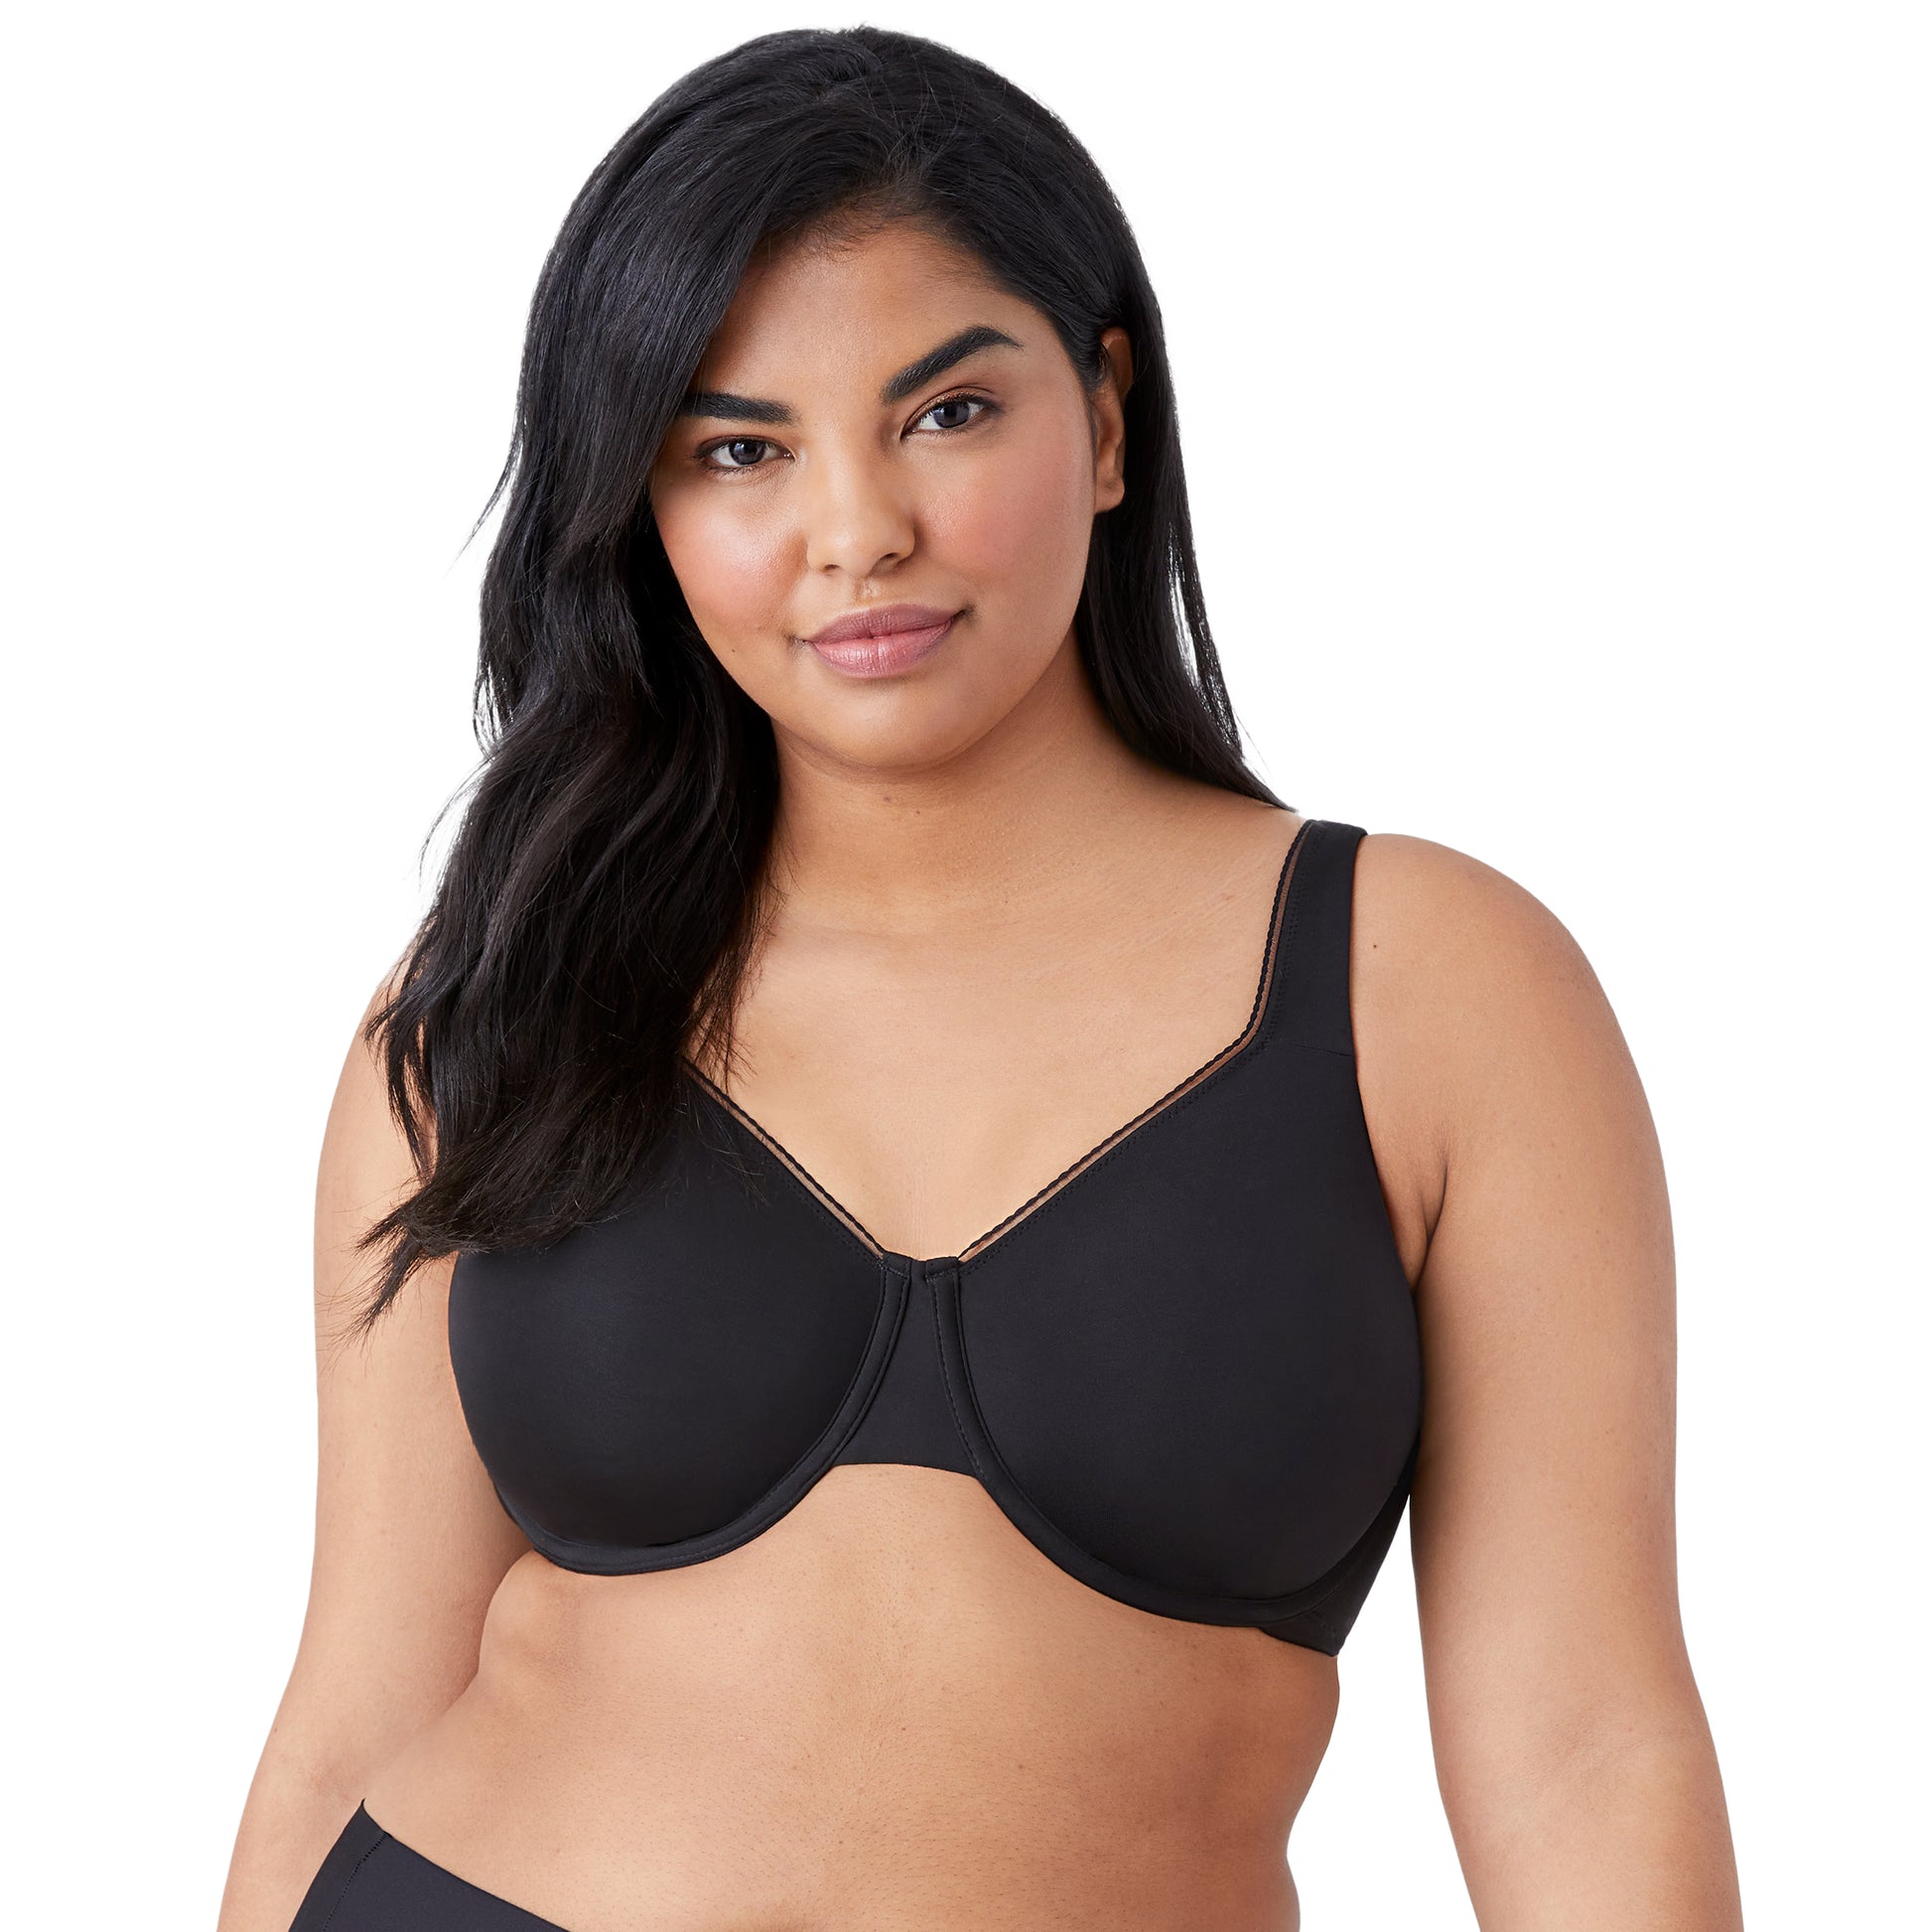 Wacoal High Standards Bra with Underwire 855352, Seamless, Stretch, Lifting